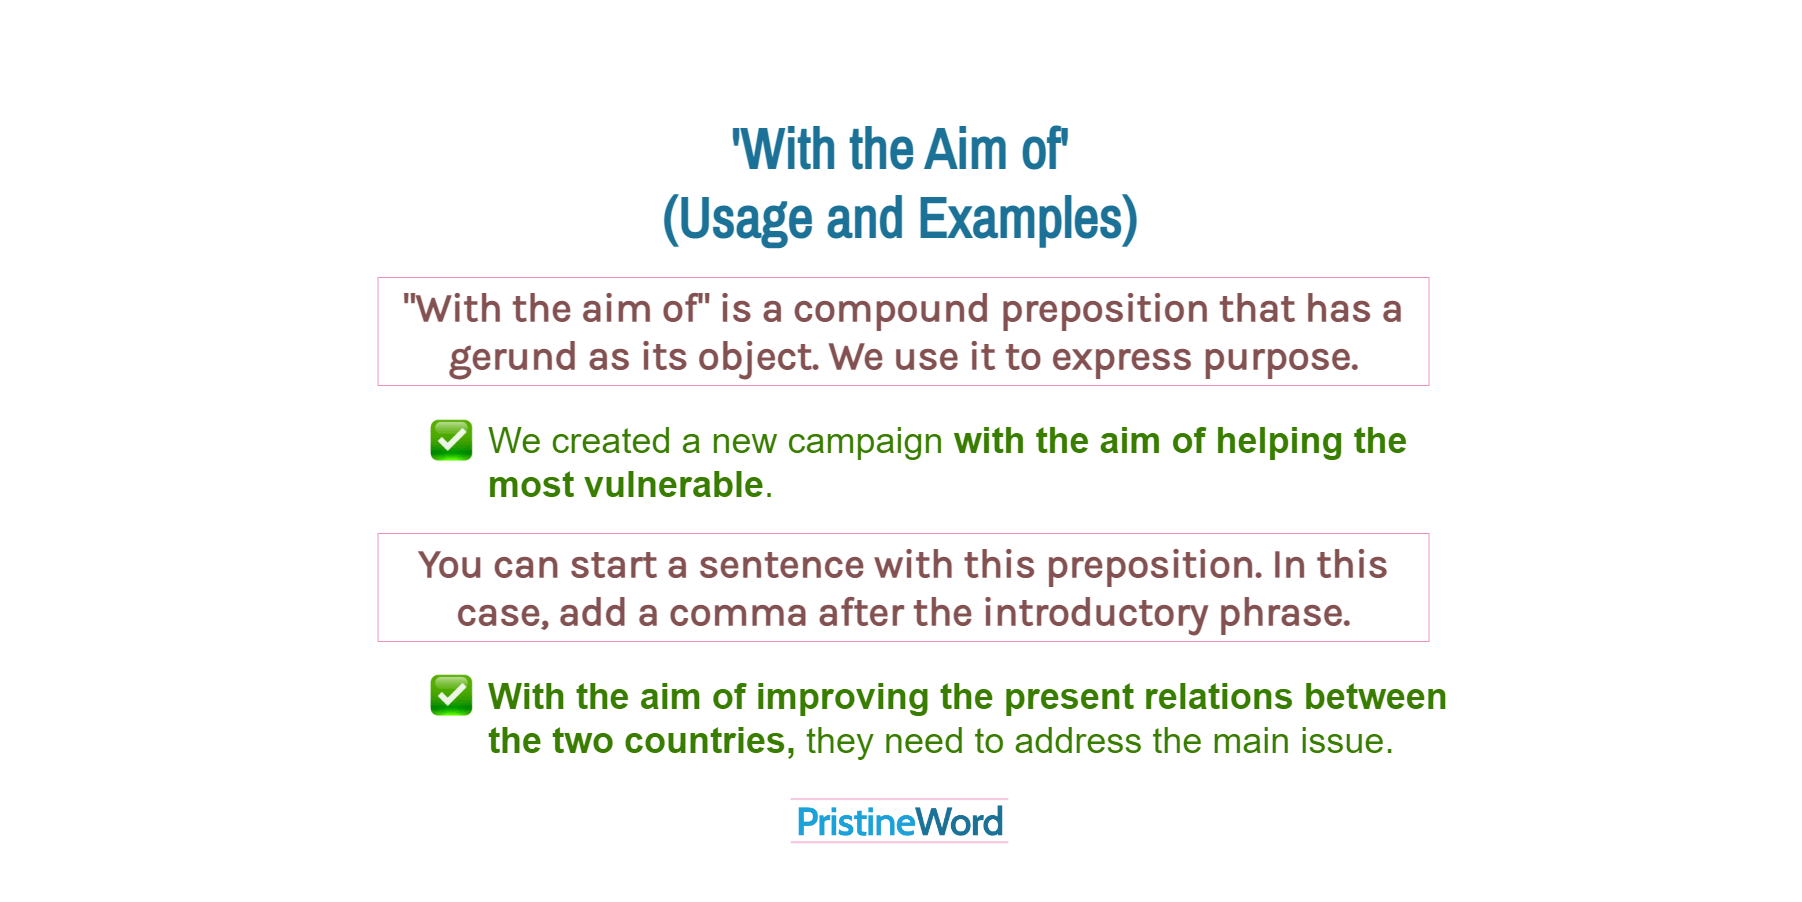 How to Use 'With the Aim of'